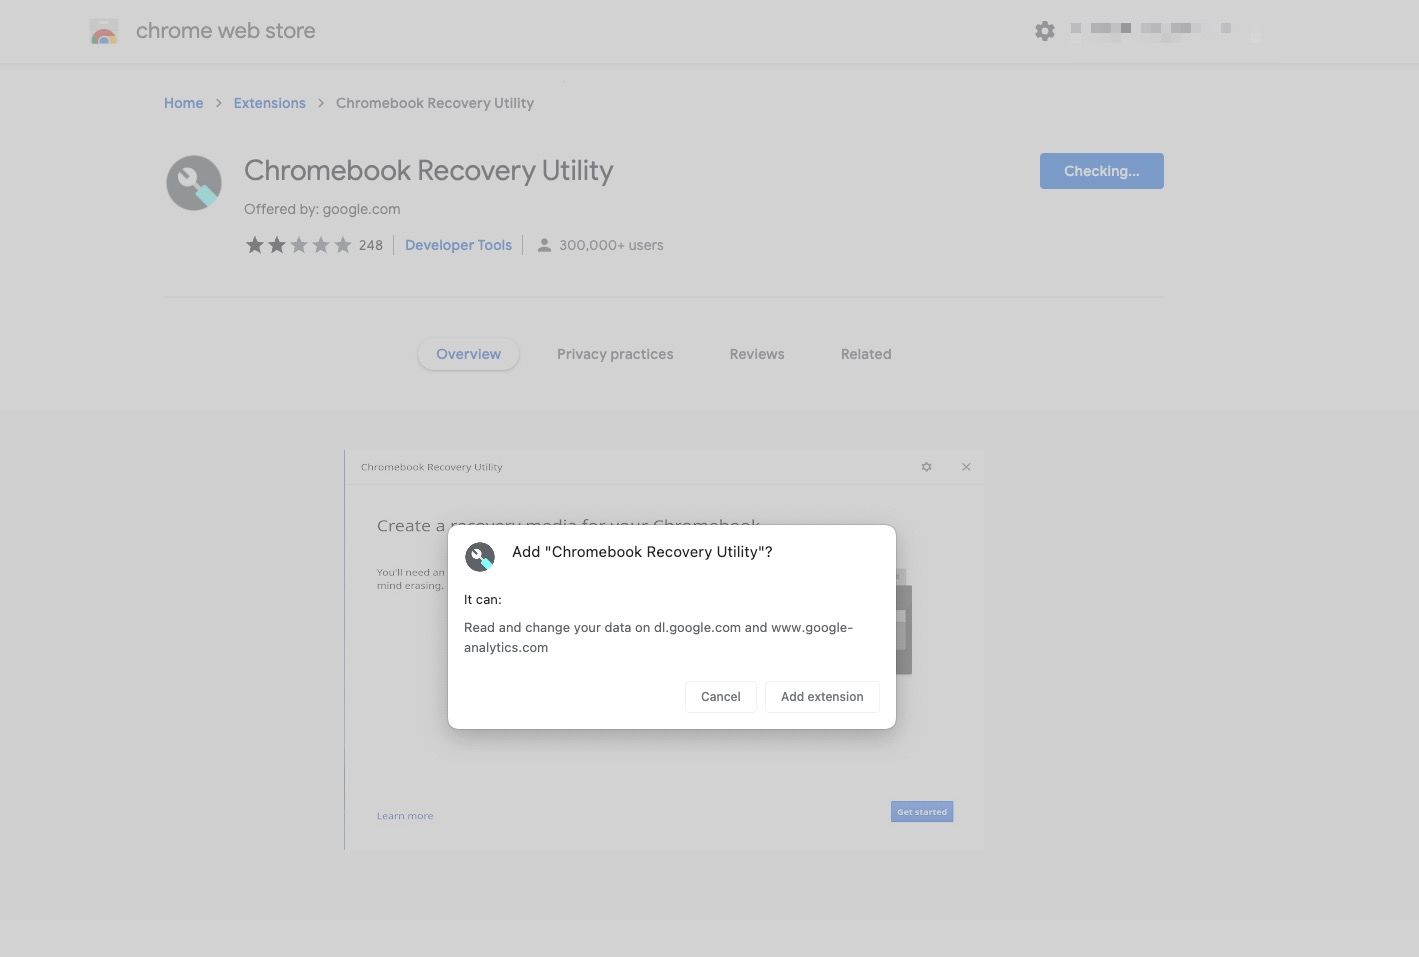 An image of the Chromebook recovery utility extension.